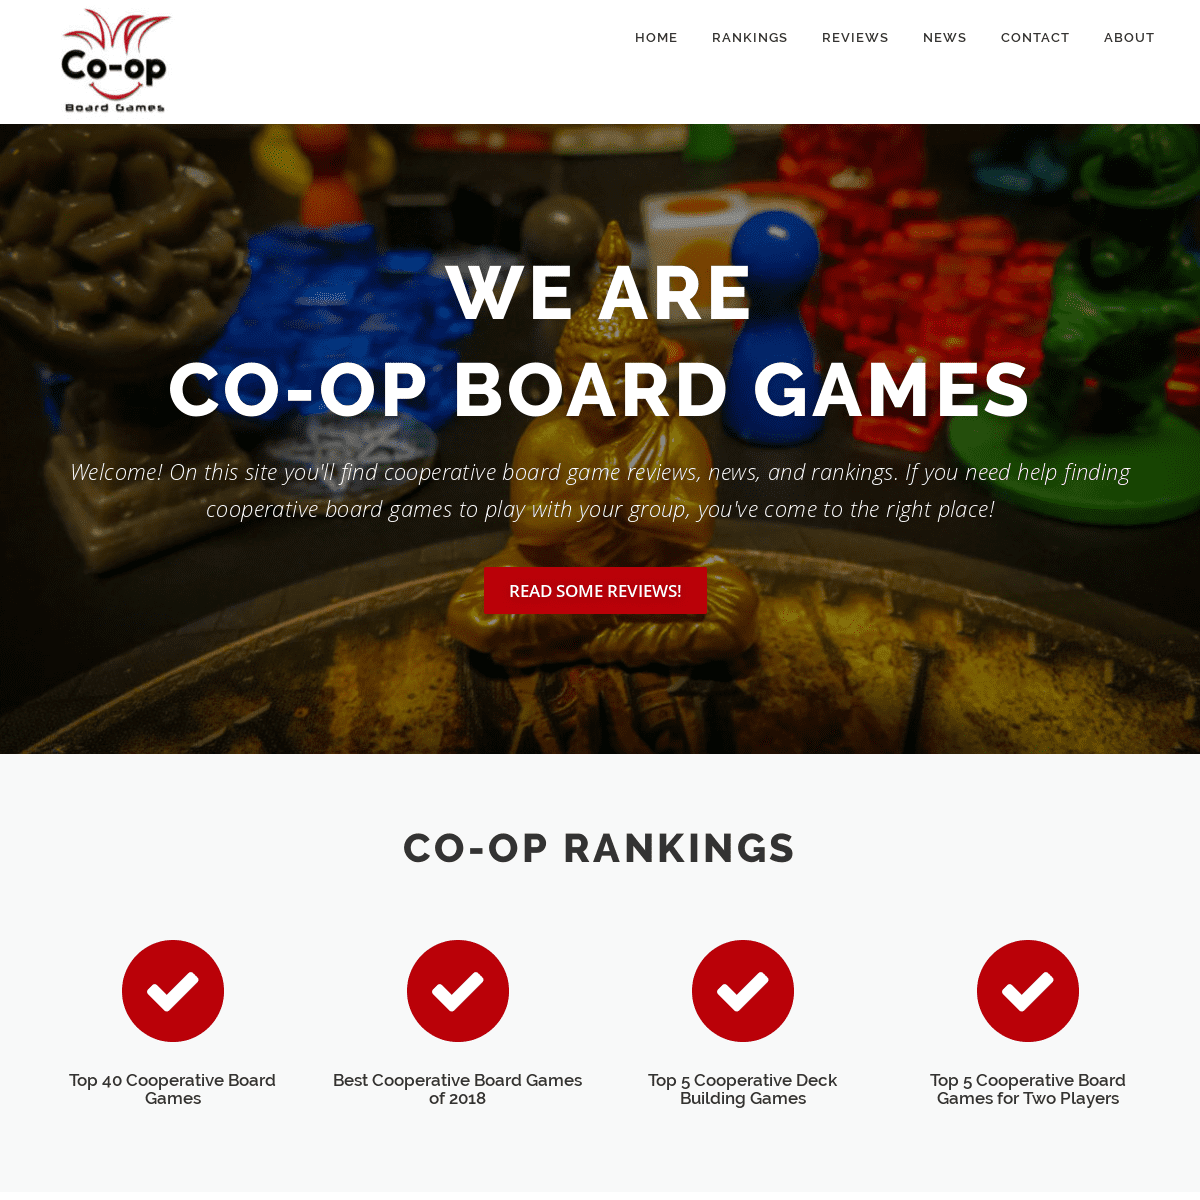 Co-op Board Games | Cooperative board game reviews, news, rankings, and more!